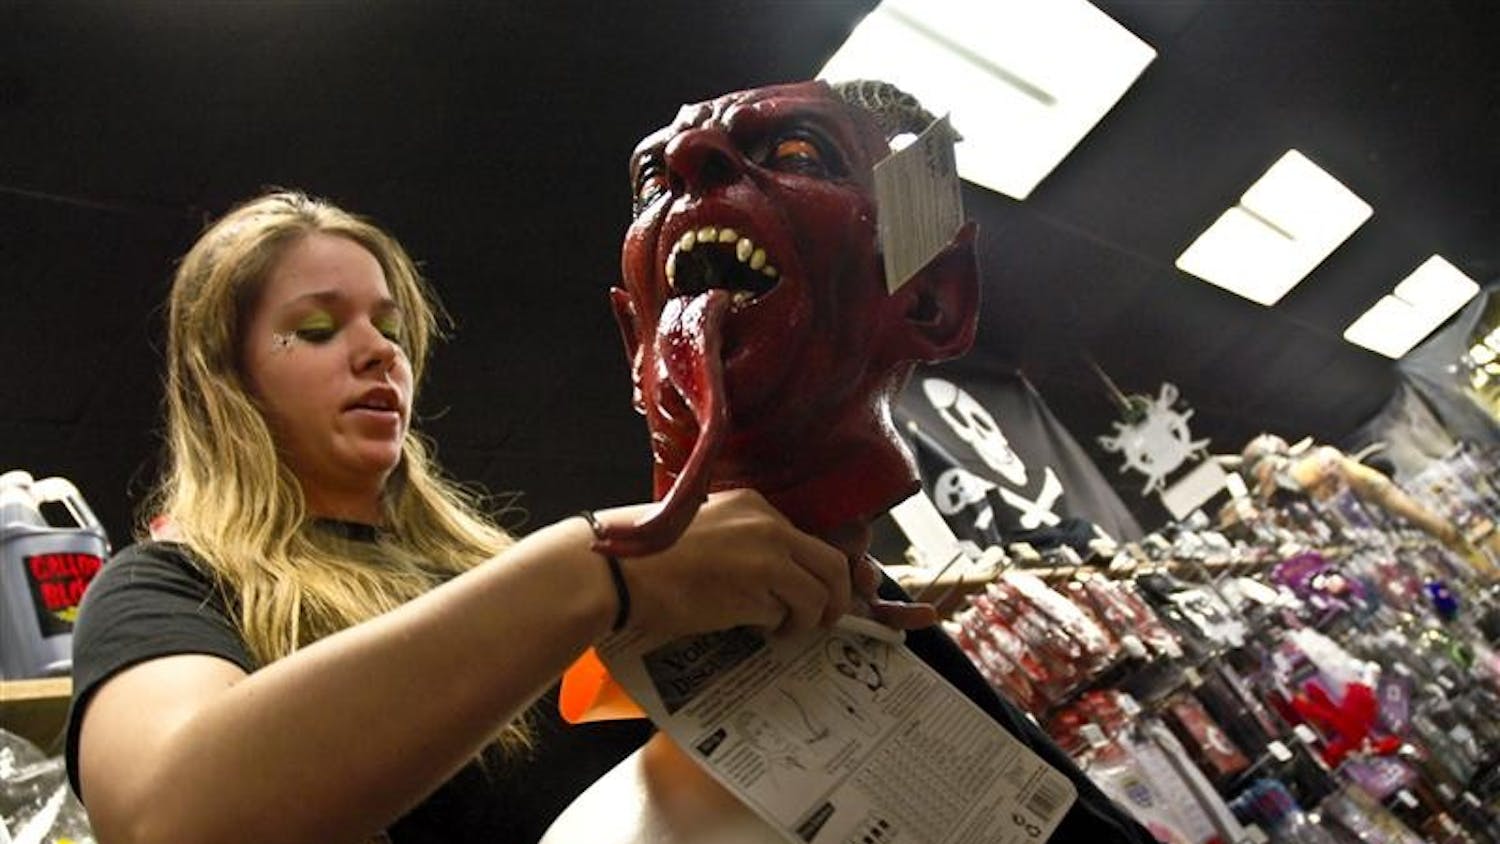 Kiersten Thomson, a IU Sophomore majoring in Criminal Justice, carefully sorts through accessories for her mask on Monday night at Campus Costume, 2530 E. 10th St.